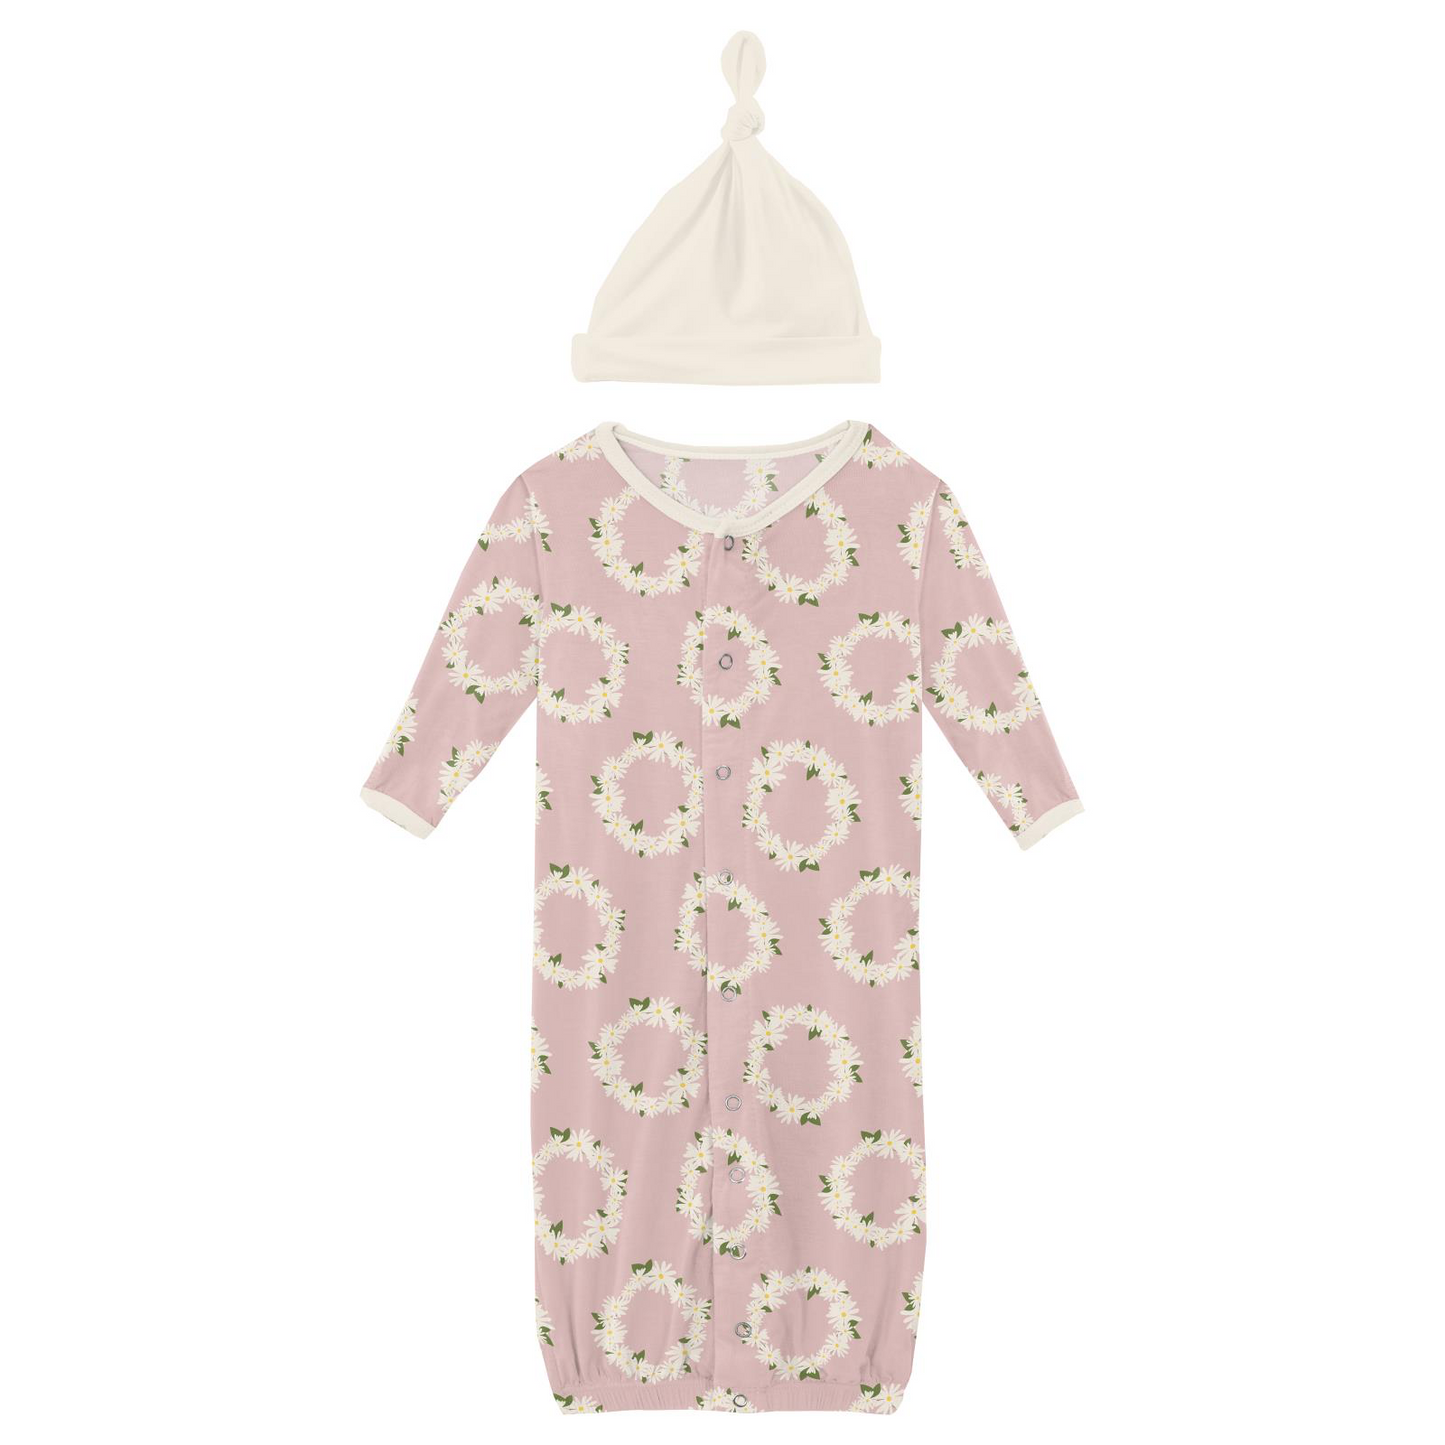 Layette Gown Converter & Single Knot Hat Set